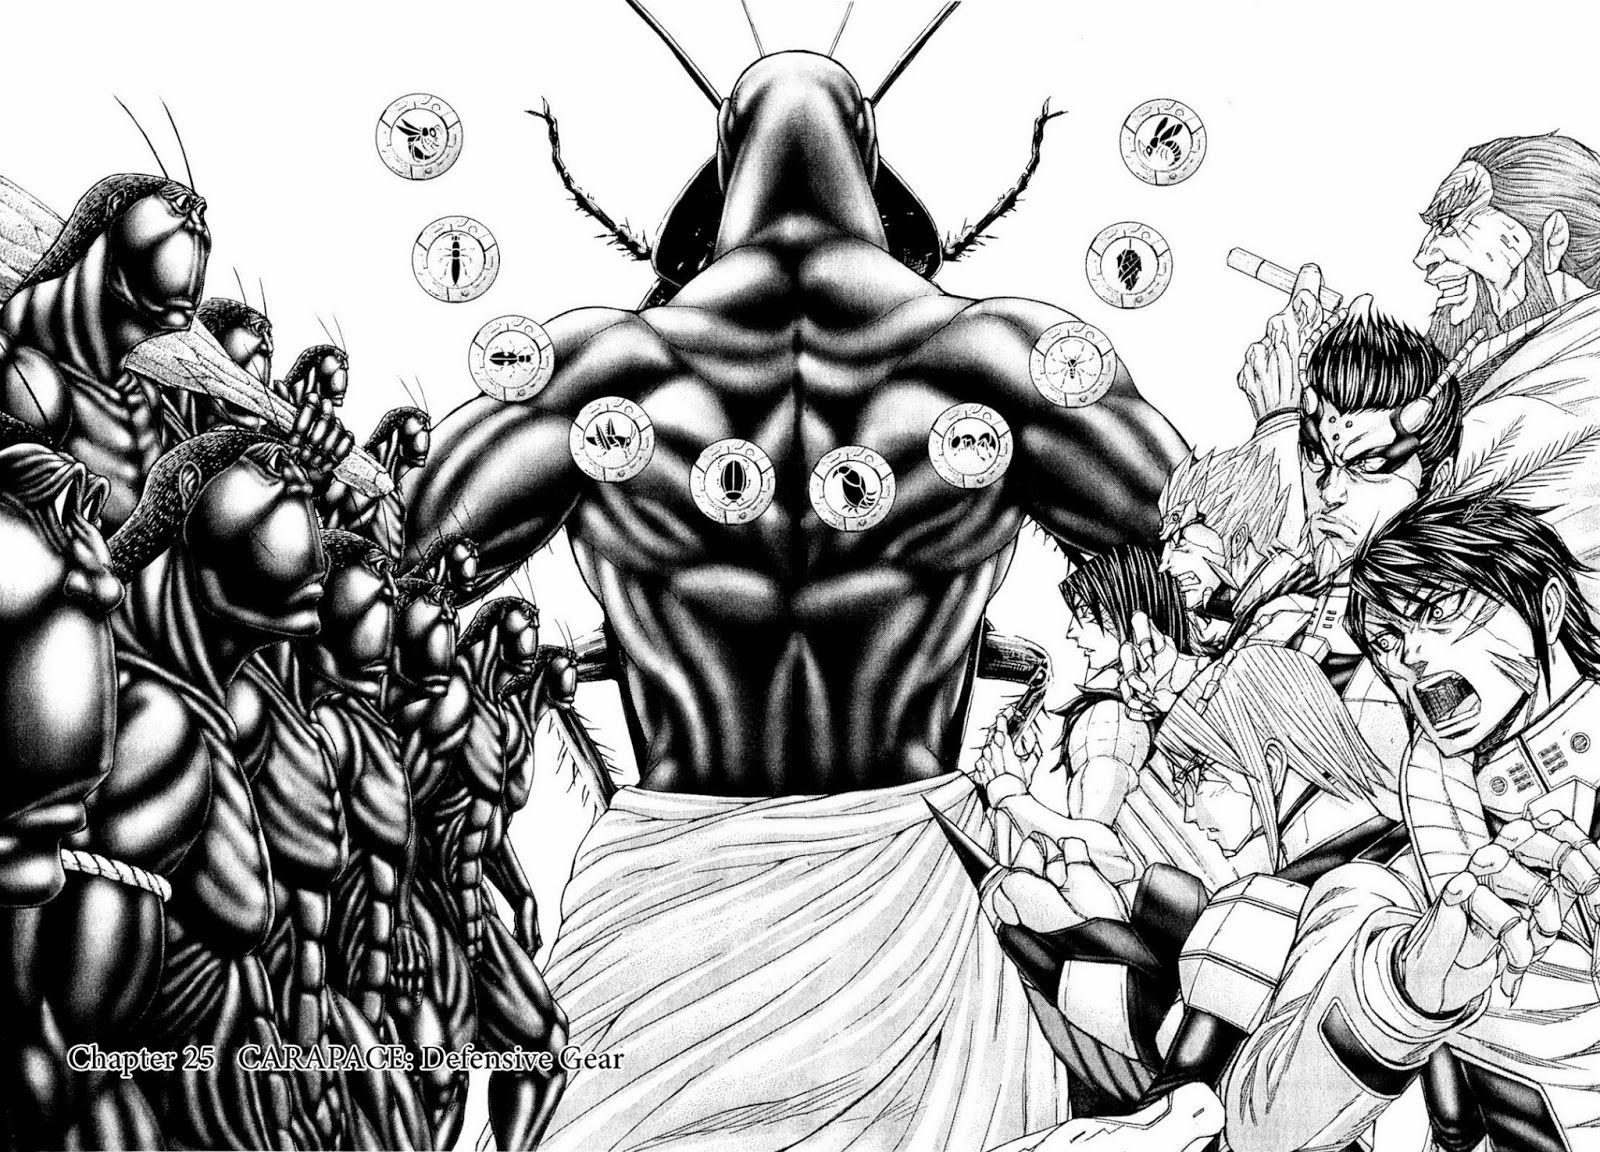 Should I watch this?: Should I Watch Terra Formars?